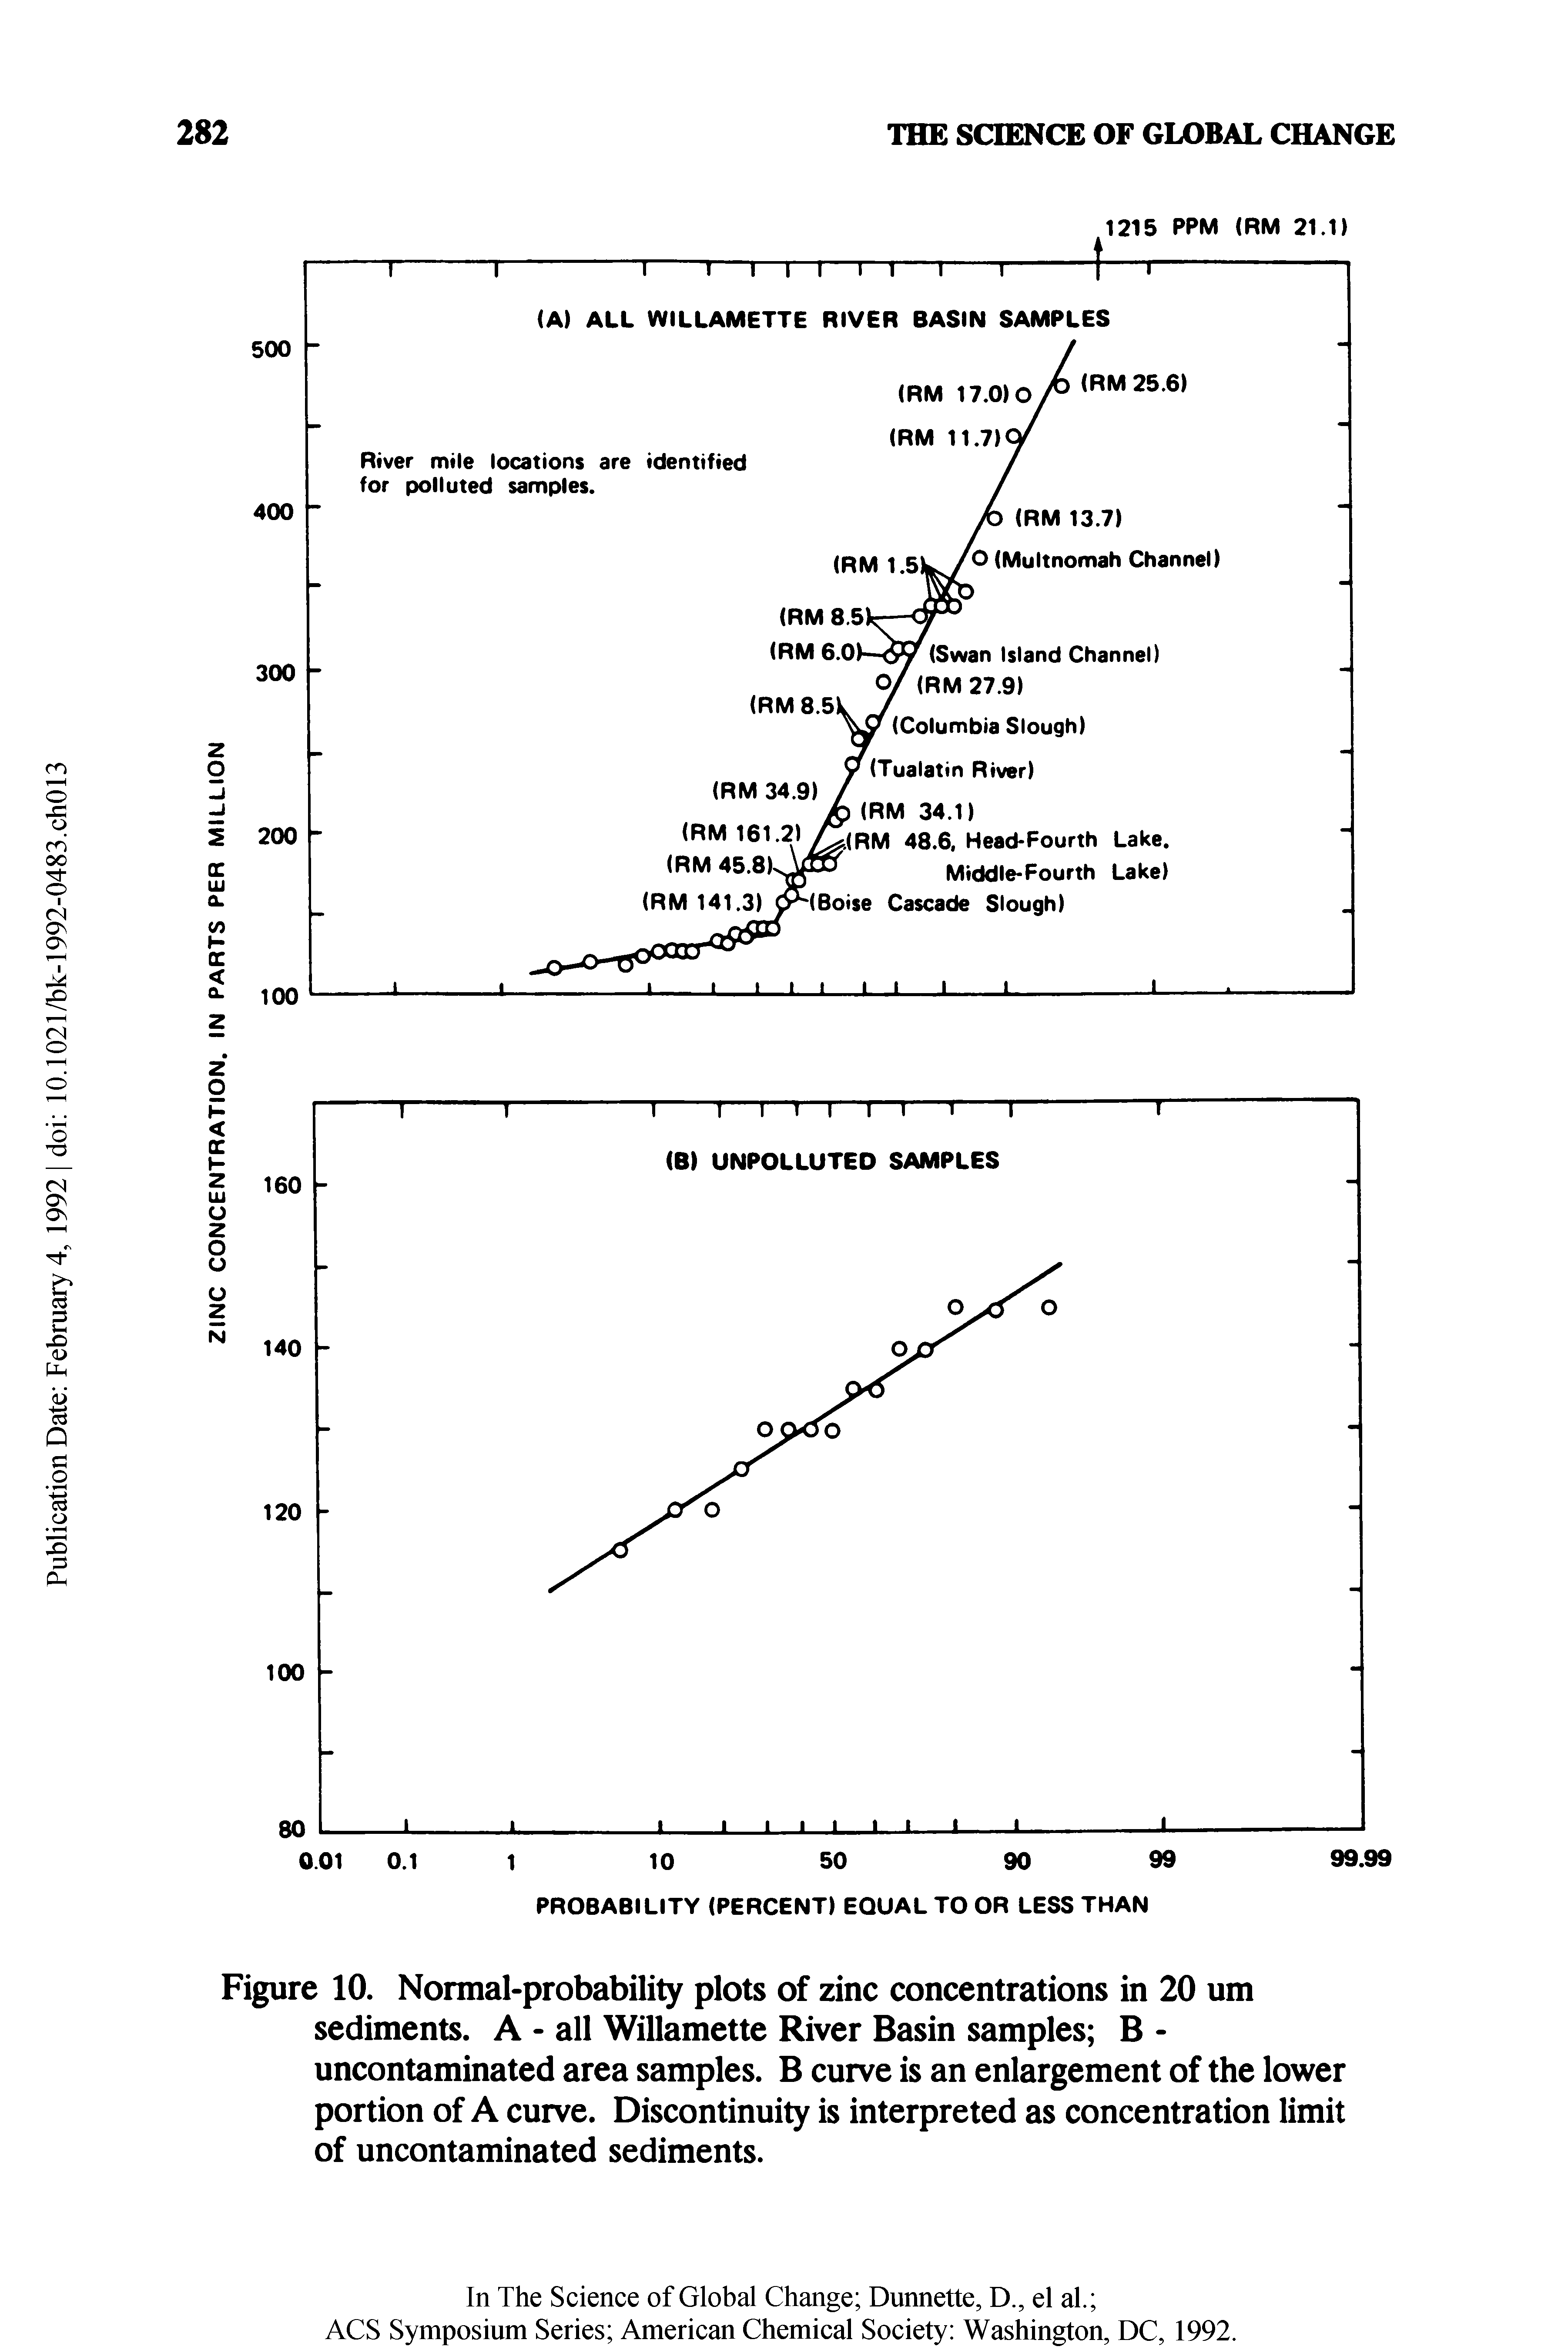 Figure 10. Normal-probability plots of zinc concentrations in 20 um sediments. A - all Willamette River Basin samples B -uncontaminated area samples. B curve is an enlargement of the lower portion of A curve. Discontinuity is interpreted as concentration limit of uncontaminated sediments.